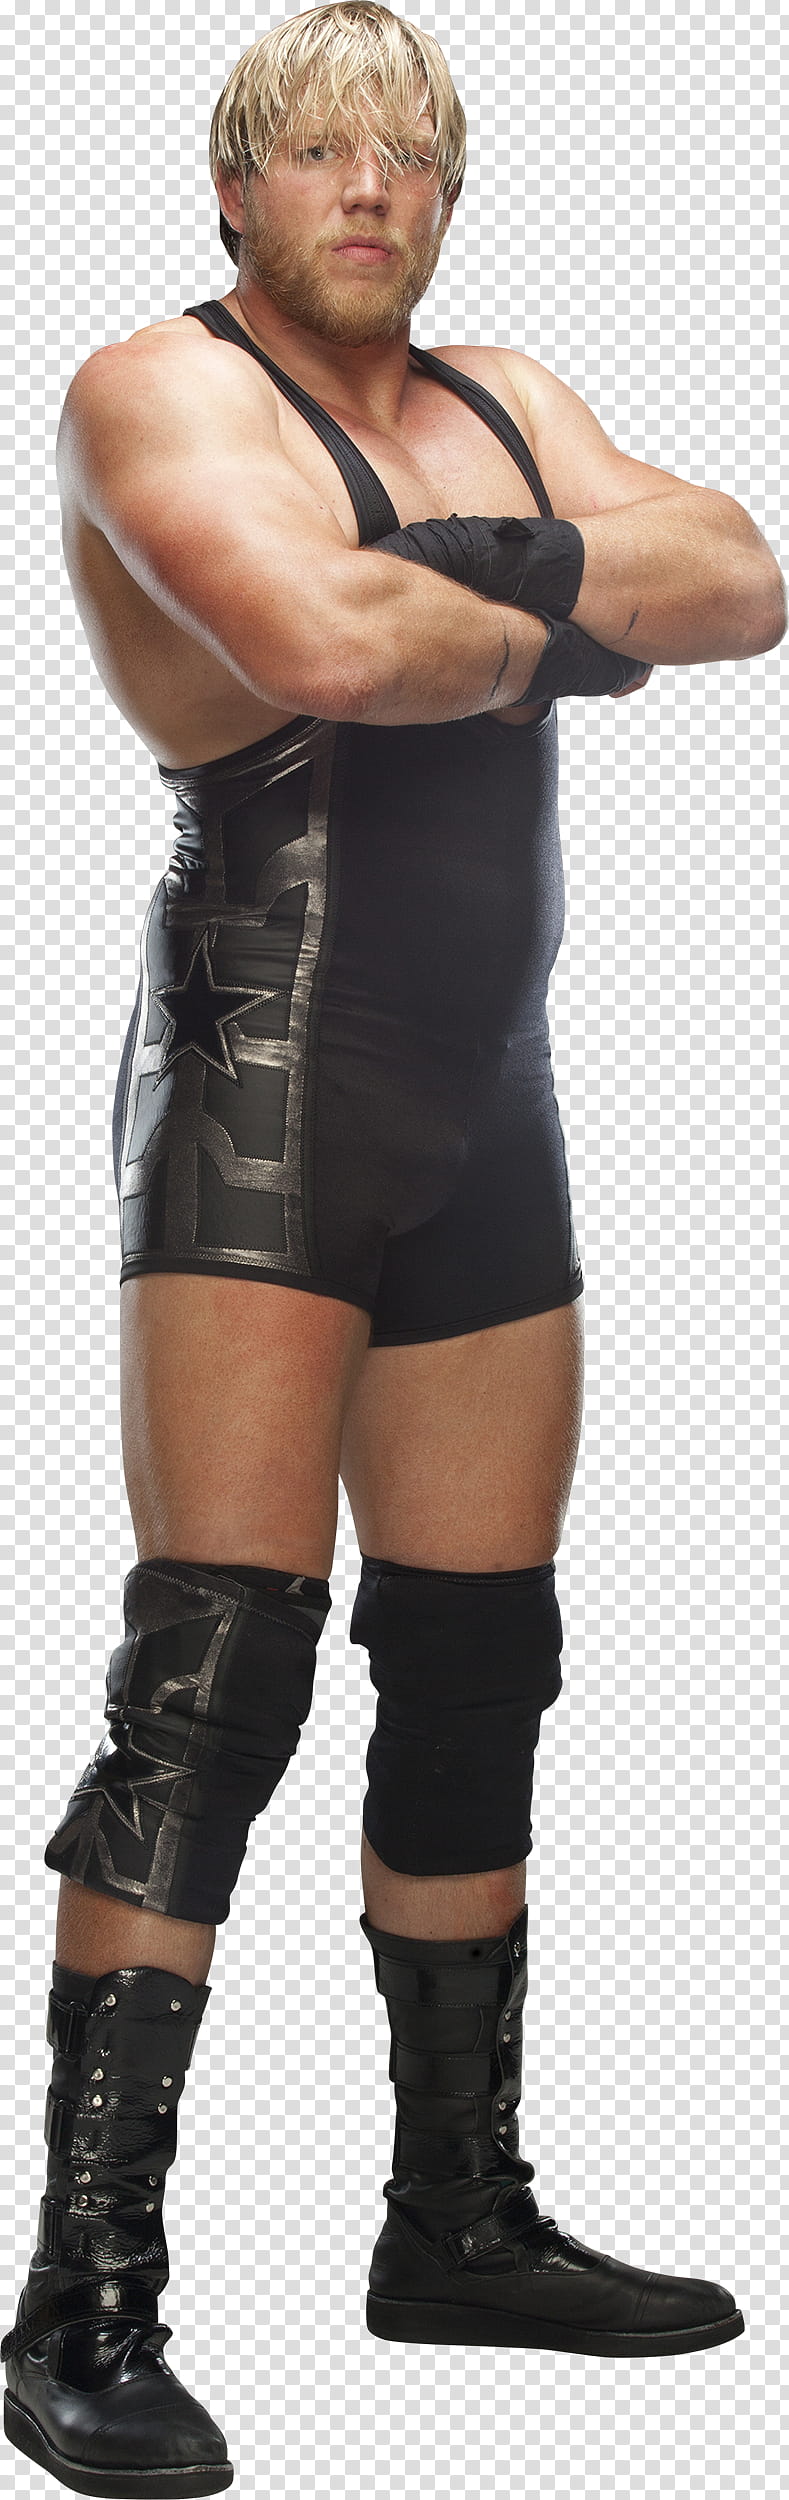 Jack Swagger transparent background PNG clipart